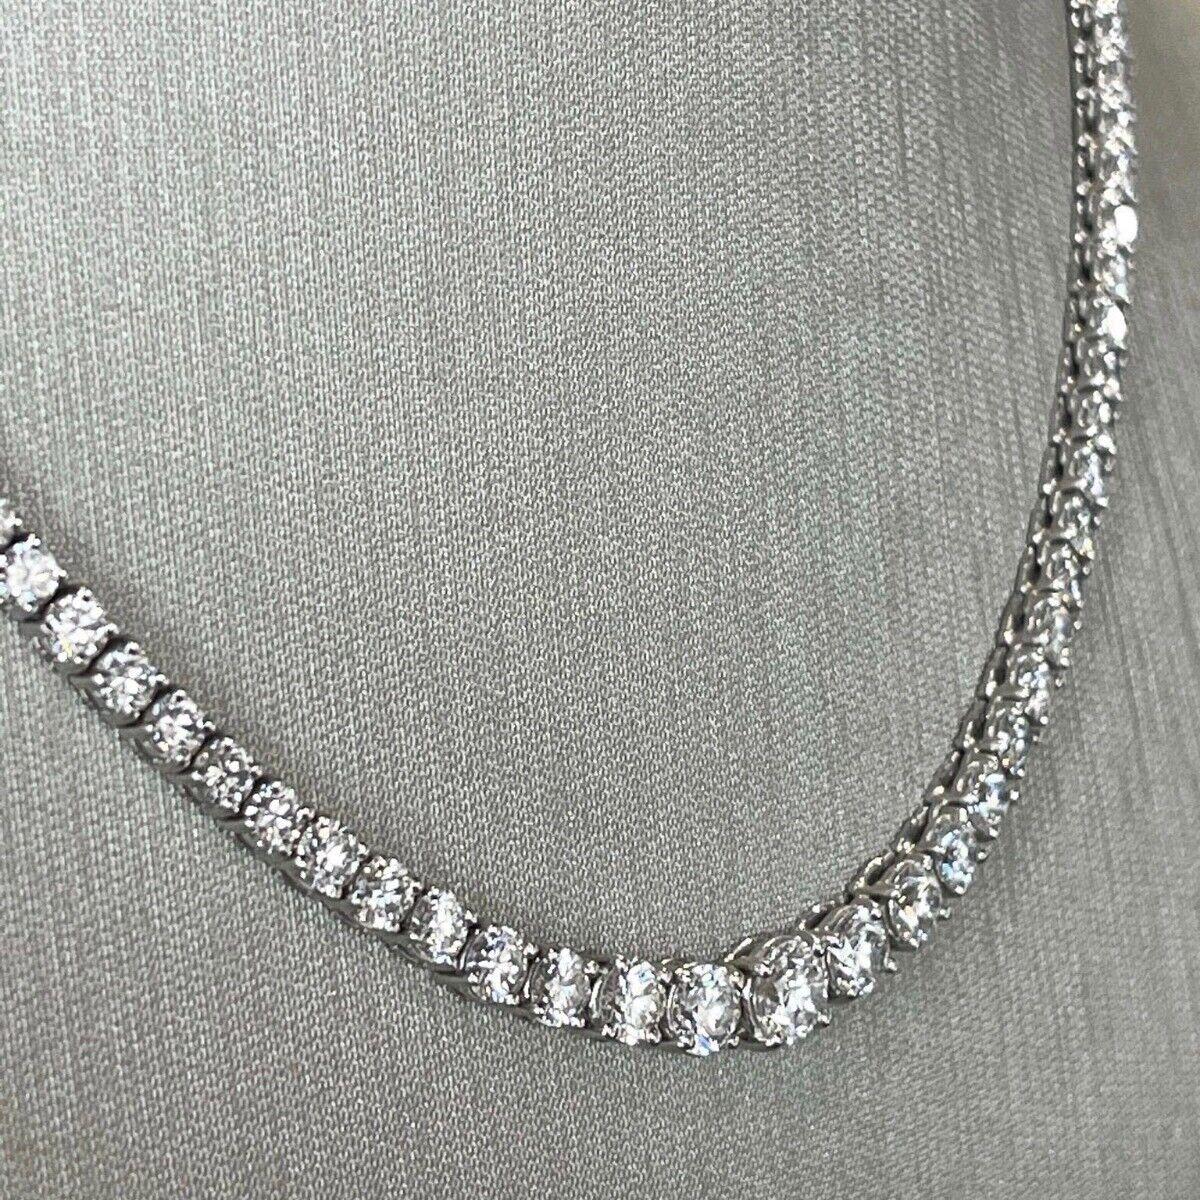 RETAIL PRICE: $65,000.00 + TAX

Brand: KWIAT

Collection: Riviera

Style: Tennis Necklace, Graduated Diamonds

Stones: 100 KWIAT Tiara cut diamonds (exceeding the GIA standards for an Excellent cut, ensuring that every stone looks bigger and